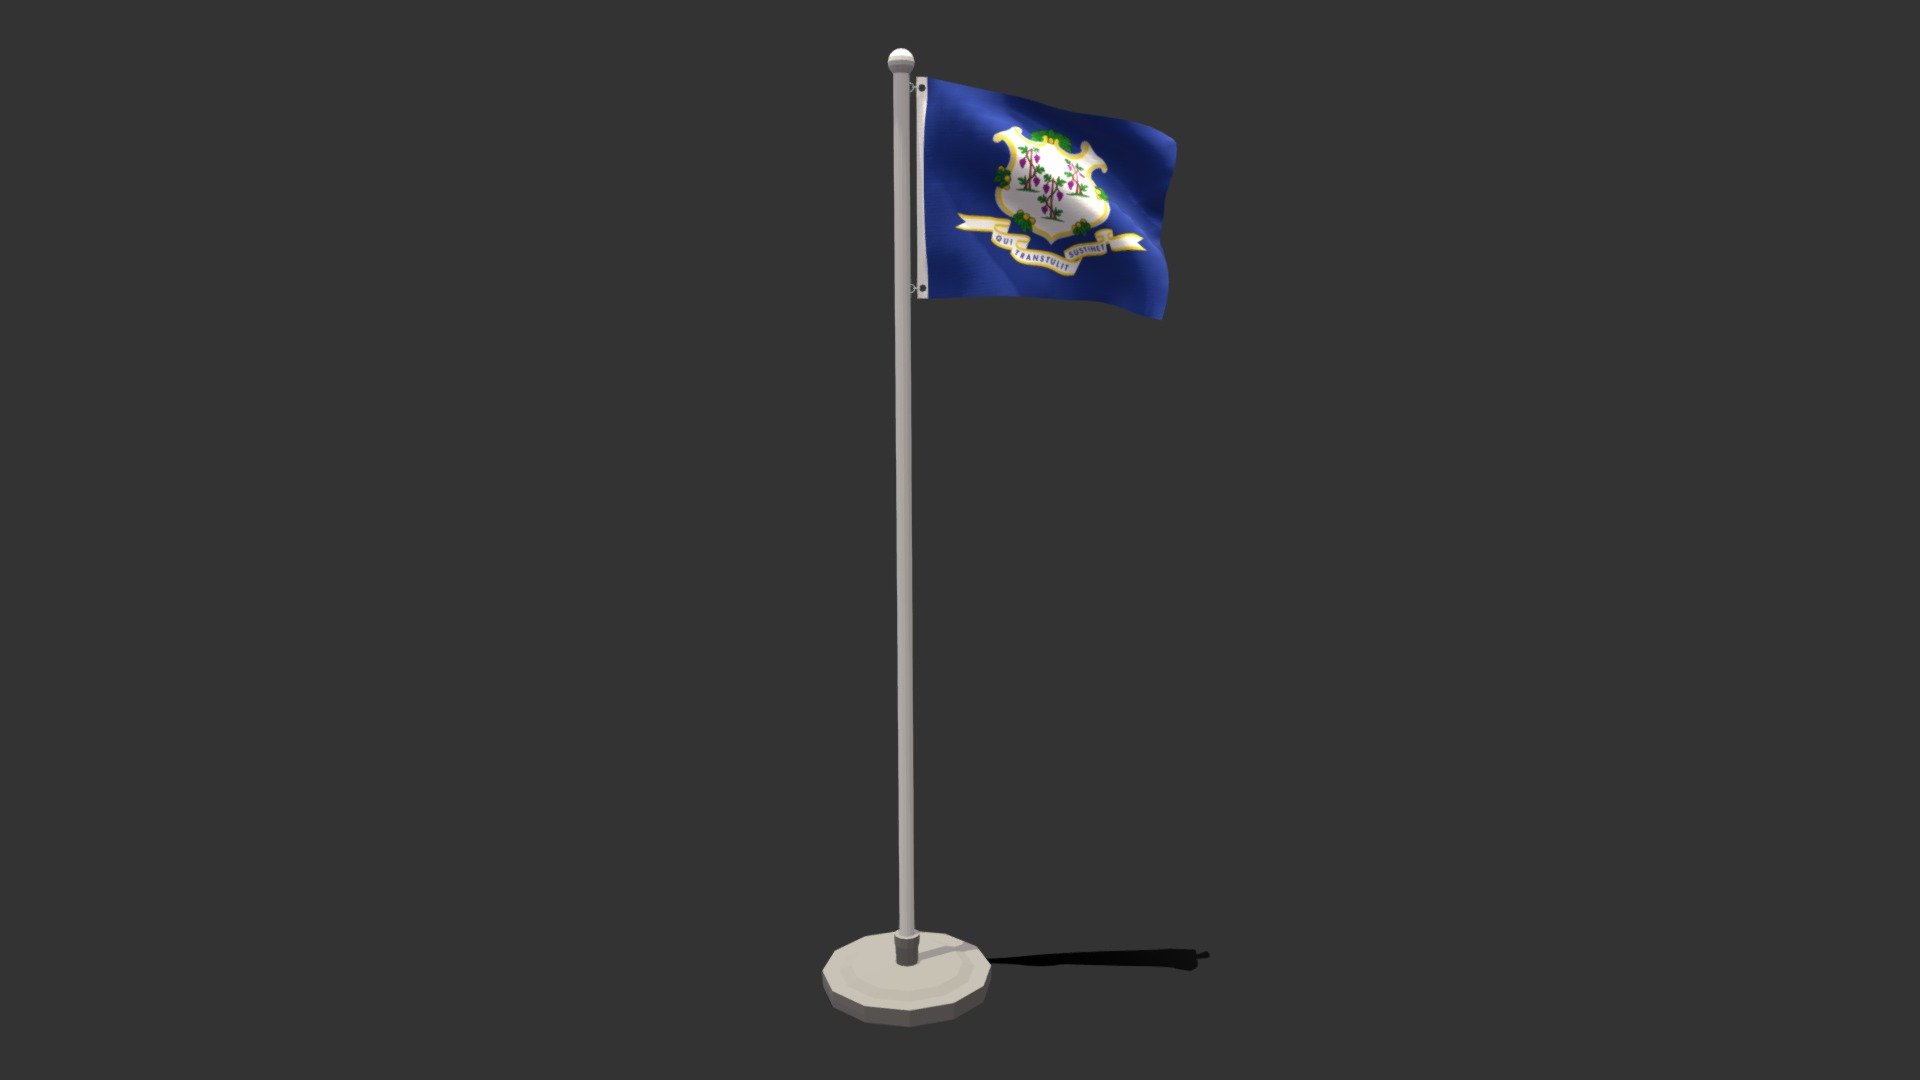 This is a low poly 3D model of an animated flag of Connecticut state. The low poly flag was modeled and prepared for low-poly style renderings, background, general CG visualization presented as 2 meshes with quads only.

Verts : 1.416 Faces : 1.343.

1024x1024 textures included. Diffuse, roughness and normal maps available only for flag. The pole have simple materials with colors.

The animation is based on shapekeys, 248 frames and seamless, no rig included.

The original file was created in blender. You will receive a OBJ, FBX, blend, DAE, Stl, gLTF, abc.

****PLEASE NOTE Animation icluded only in blend, FBX, abc and glTF files.

Warning: Depending on which software package you are using, the exchange formats (.obj , .dae, .fbx) may not match the preview images exactly. Due to the nature of these formats, there may be some textures that have to be loaded by hand and possibly triangulated geometry 3d model